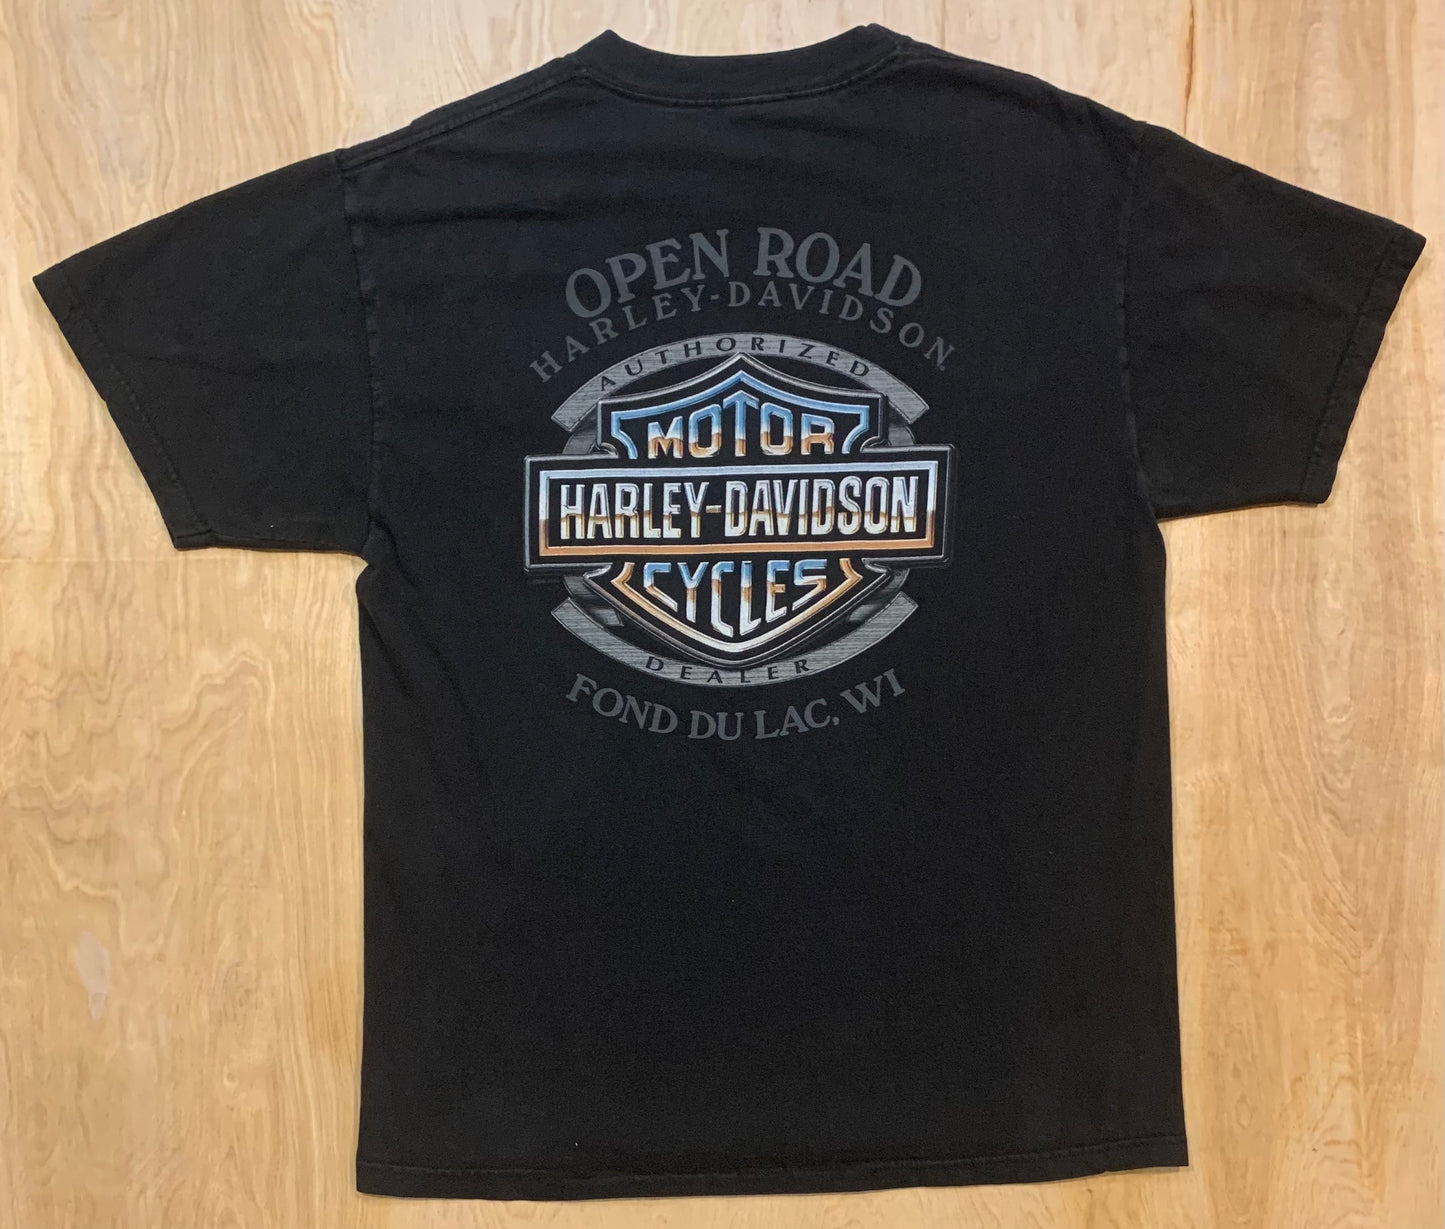 2006 Harley Davidson "You either have one, or you don't" T-shirt